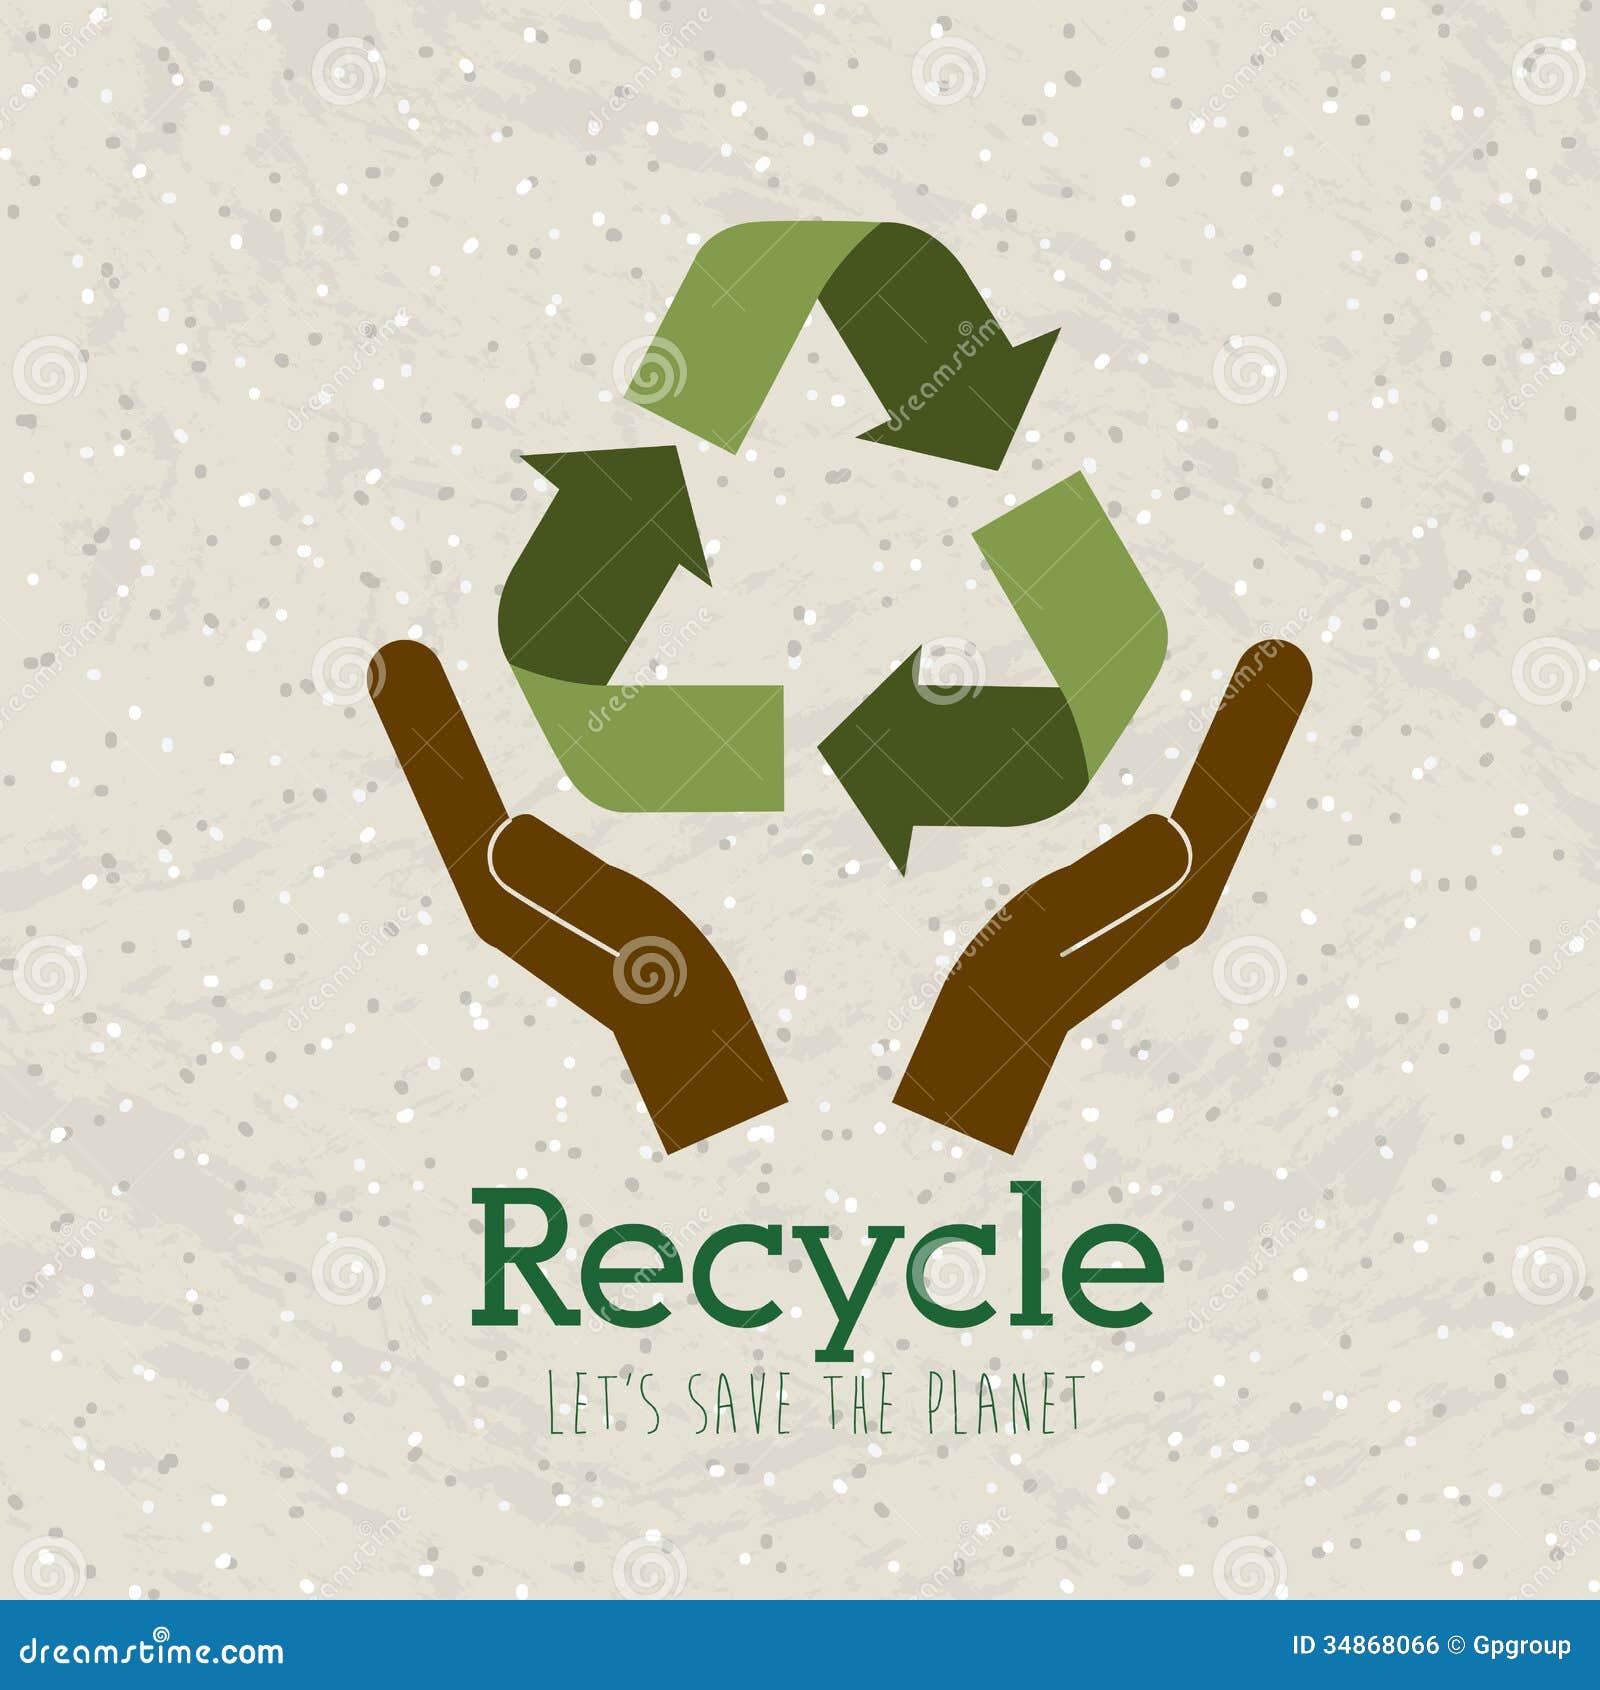 Recycle Royalty Free Stock Image - Image: 34868066